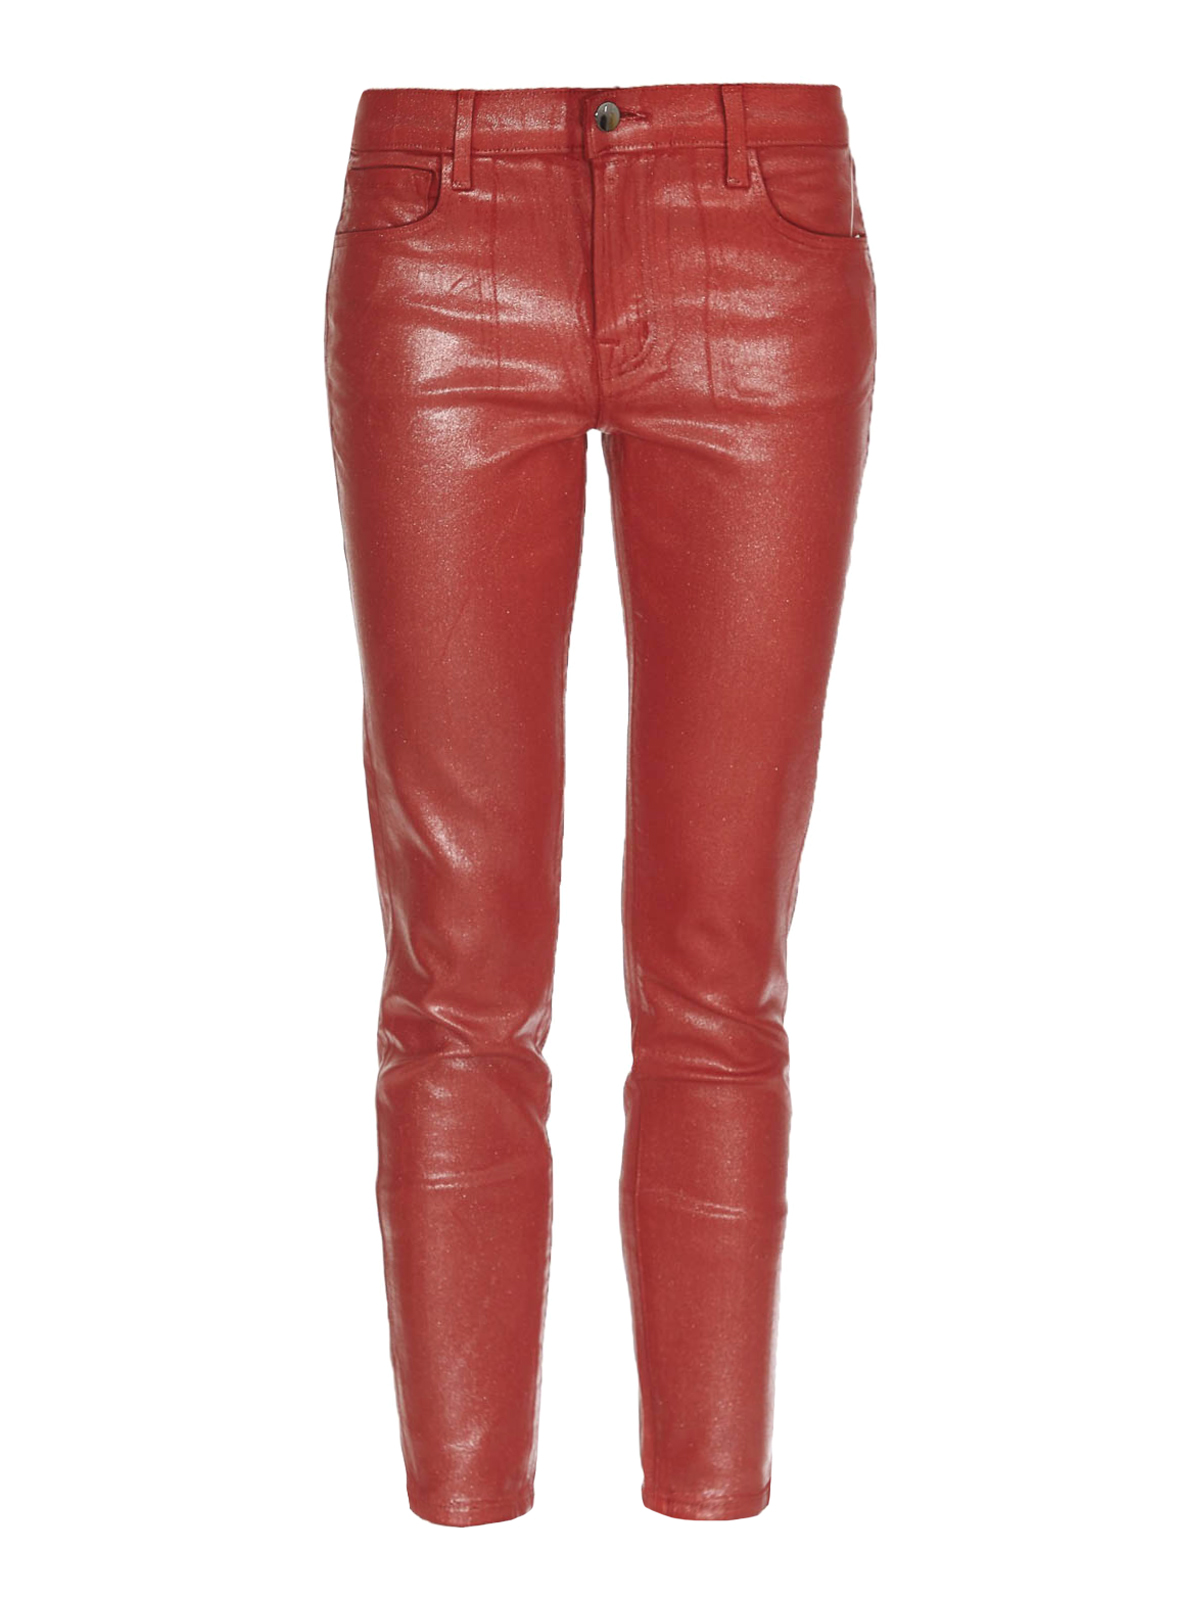 red metallic jeans